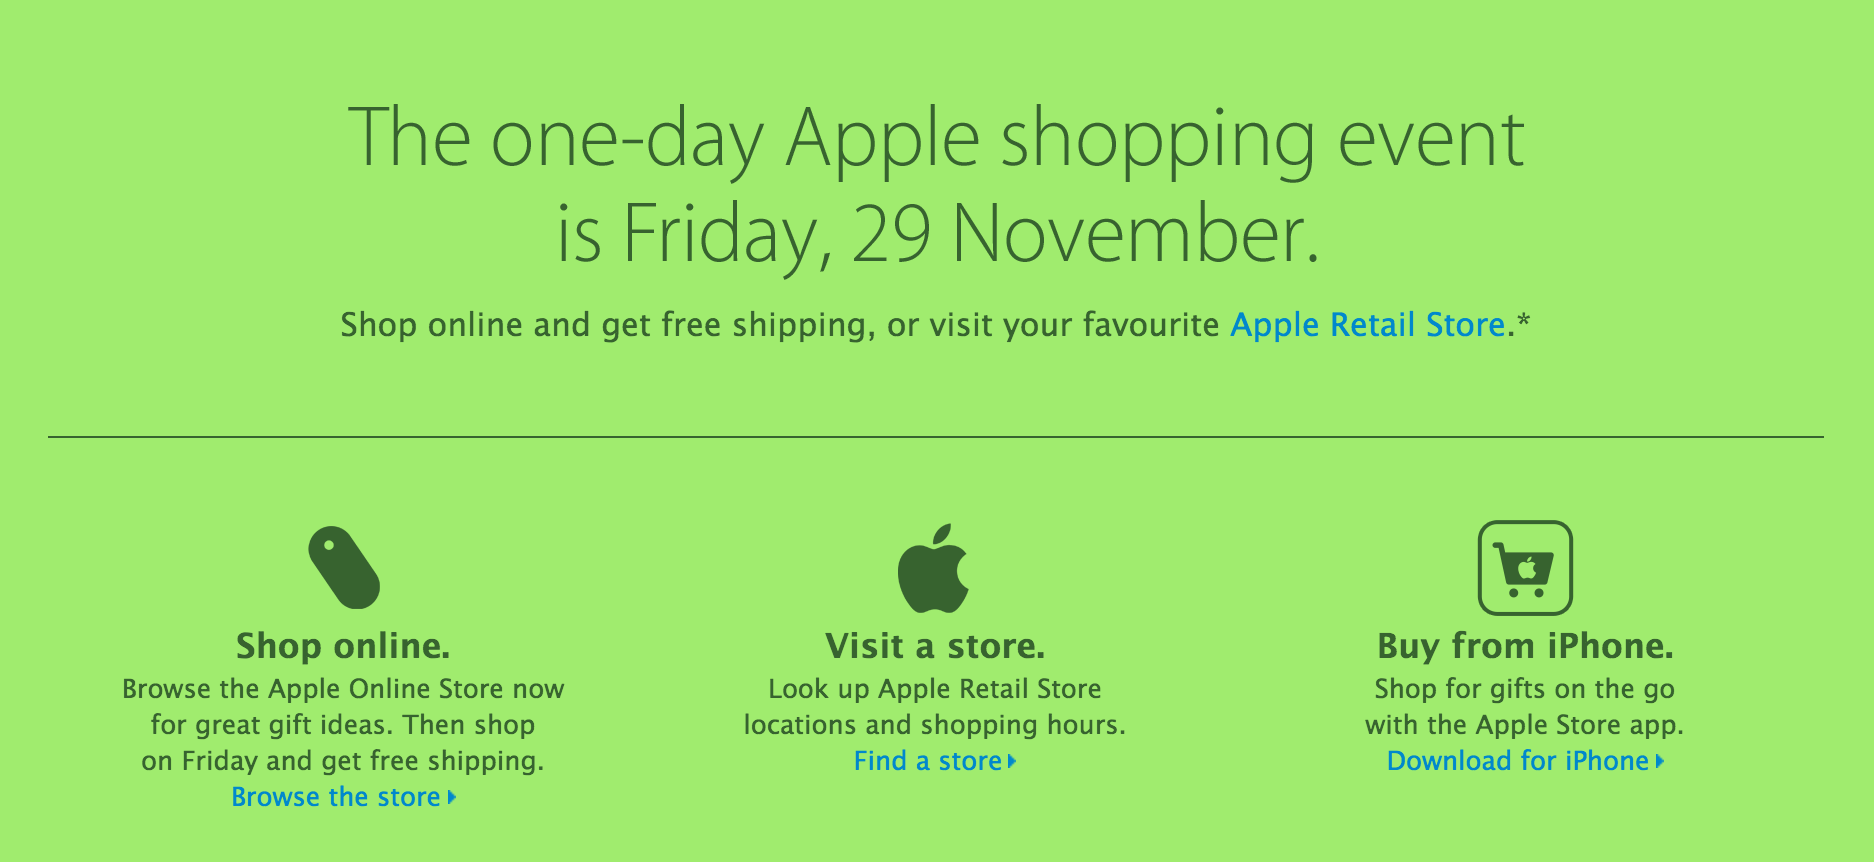 The Apple Black Friday 2013 event is confirmed, but it's not where you'll find the best Black Friday deals.